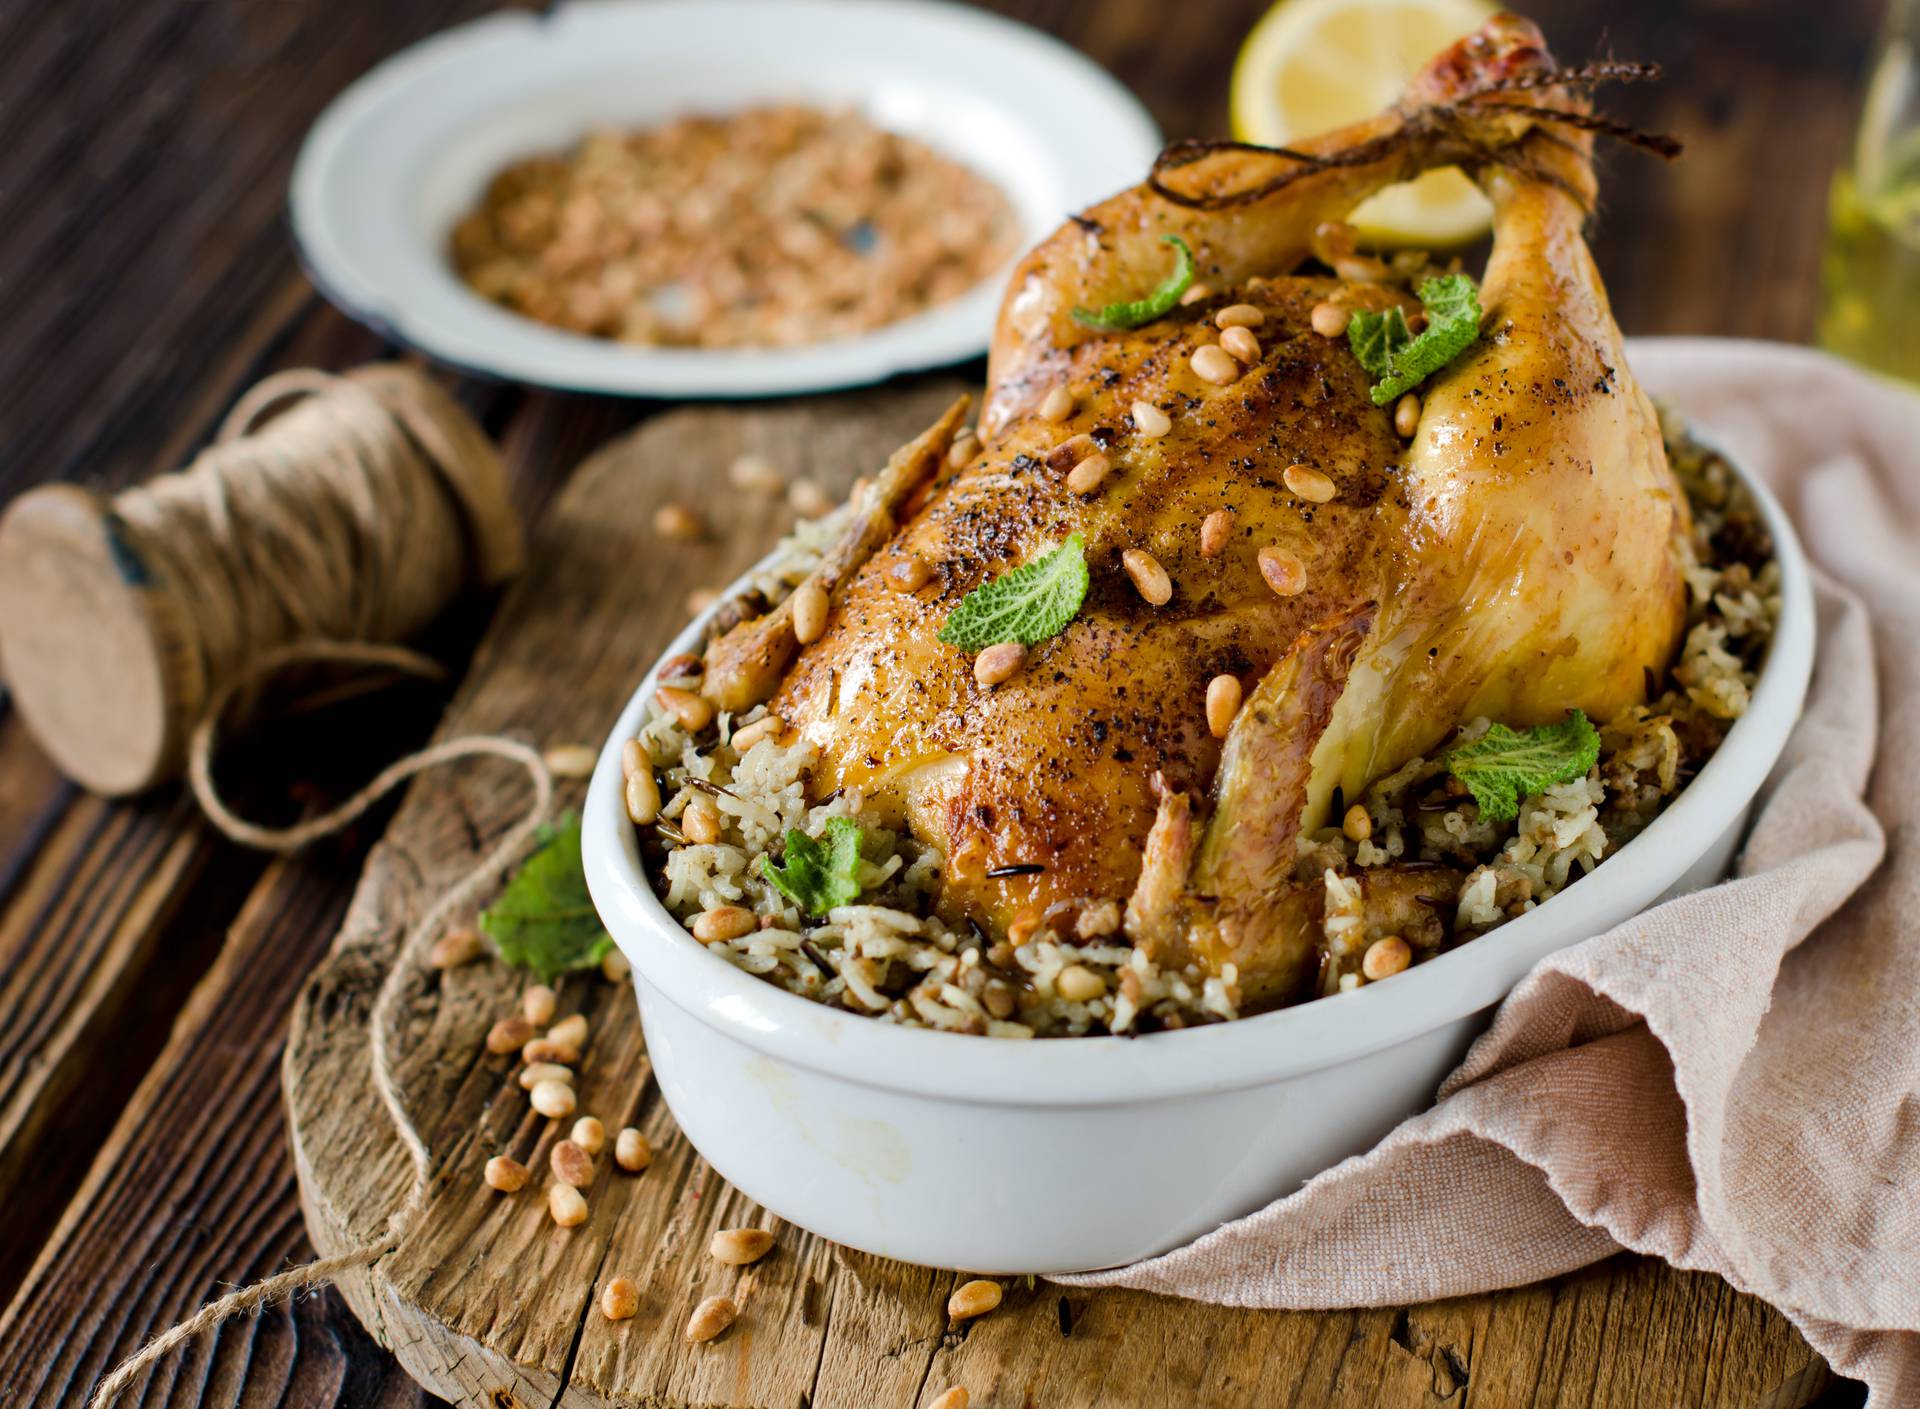 Chicken stuffed with rice and pine nuts